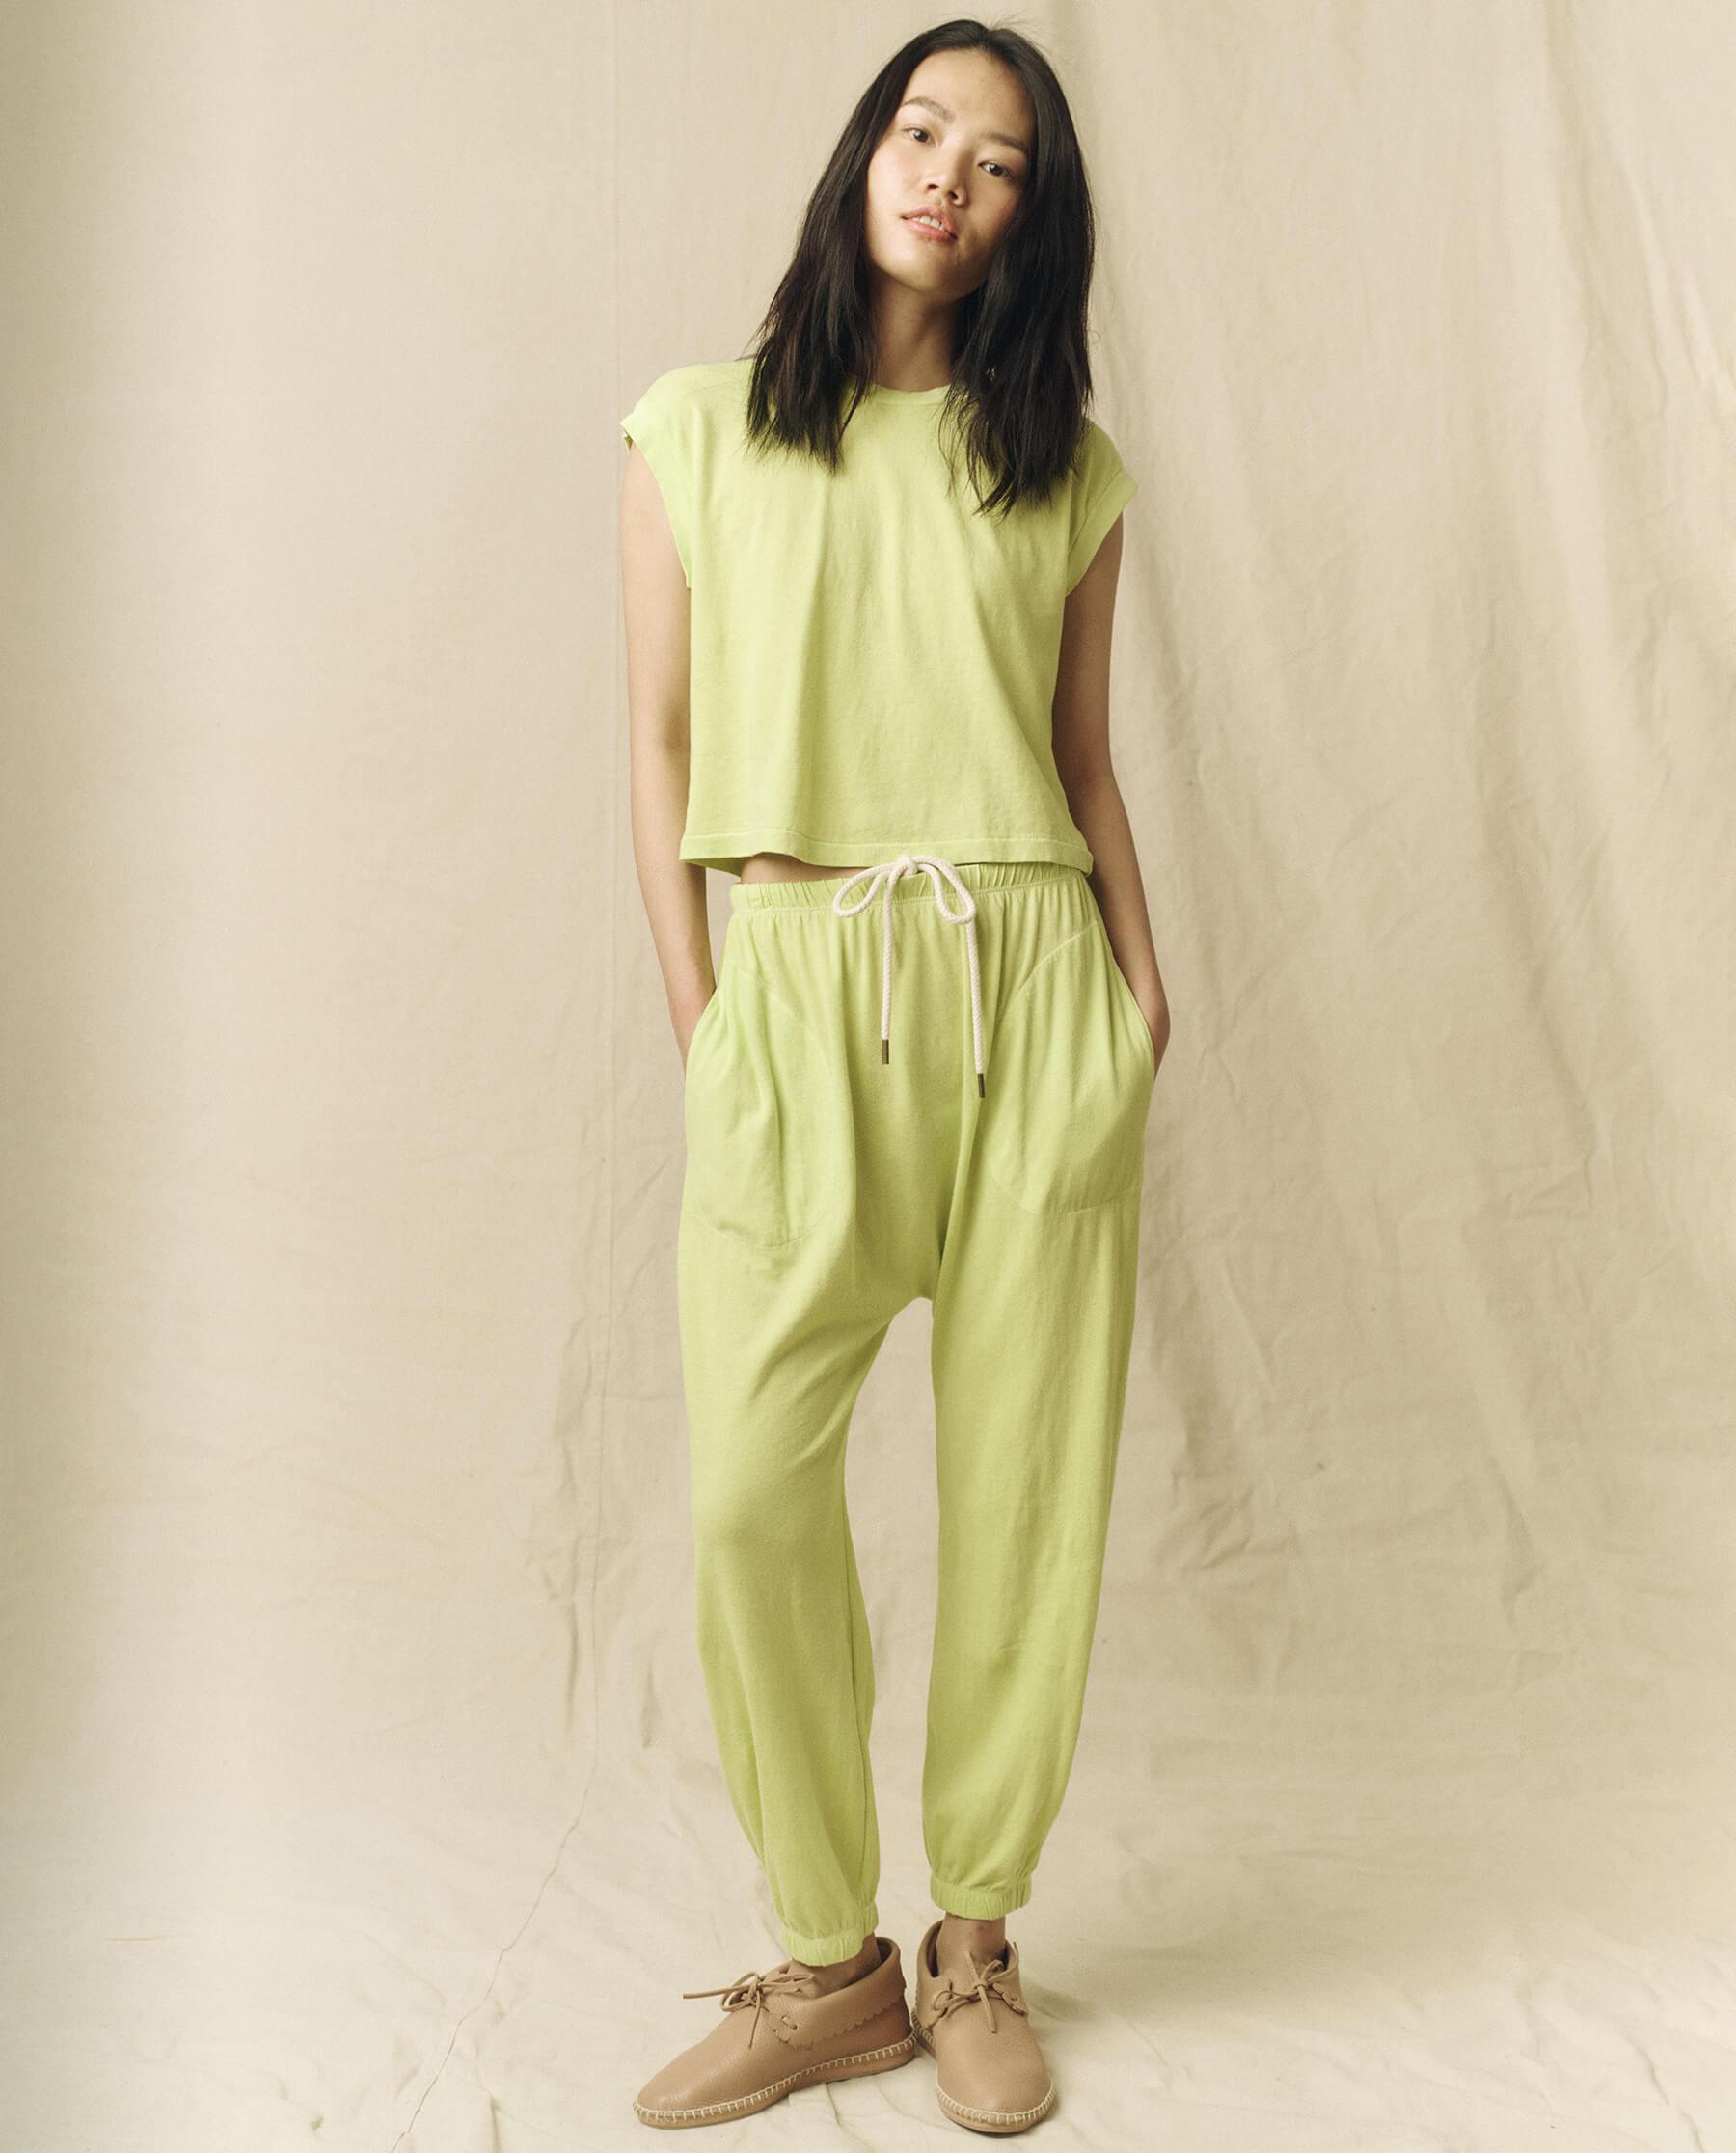 The Jersey Jogger Pant. -- Lime Zest SWEATPANTS THE GREAT. SU23 KNITS